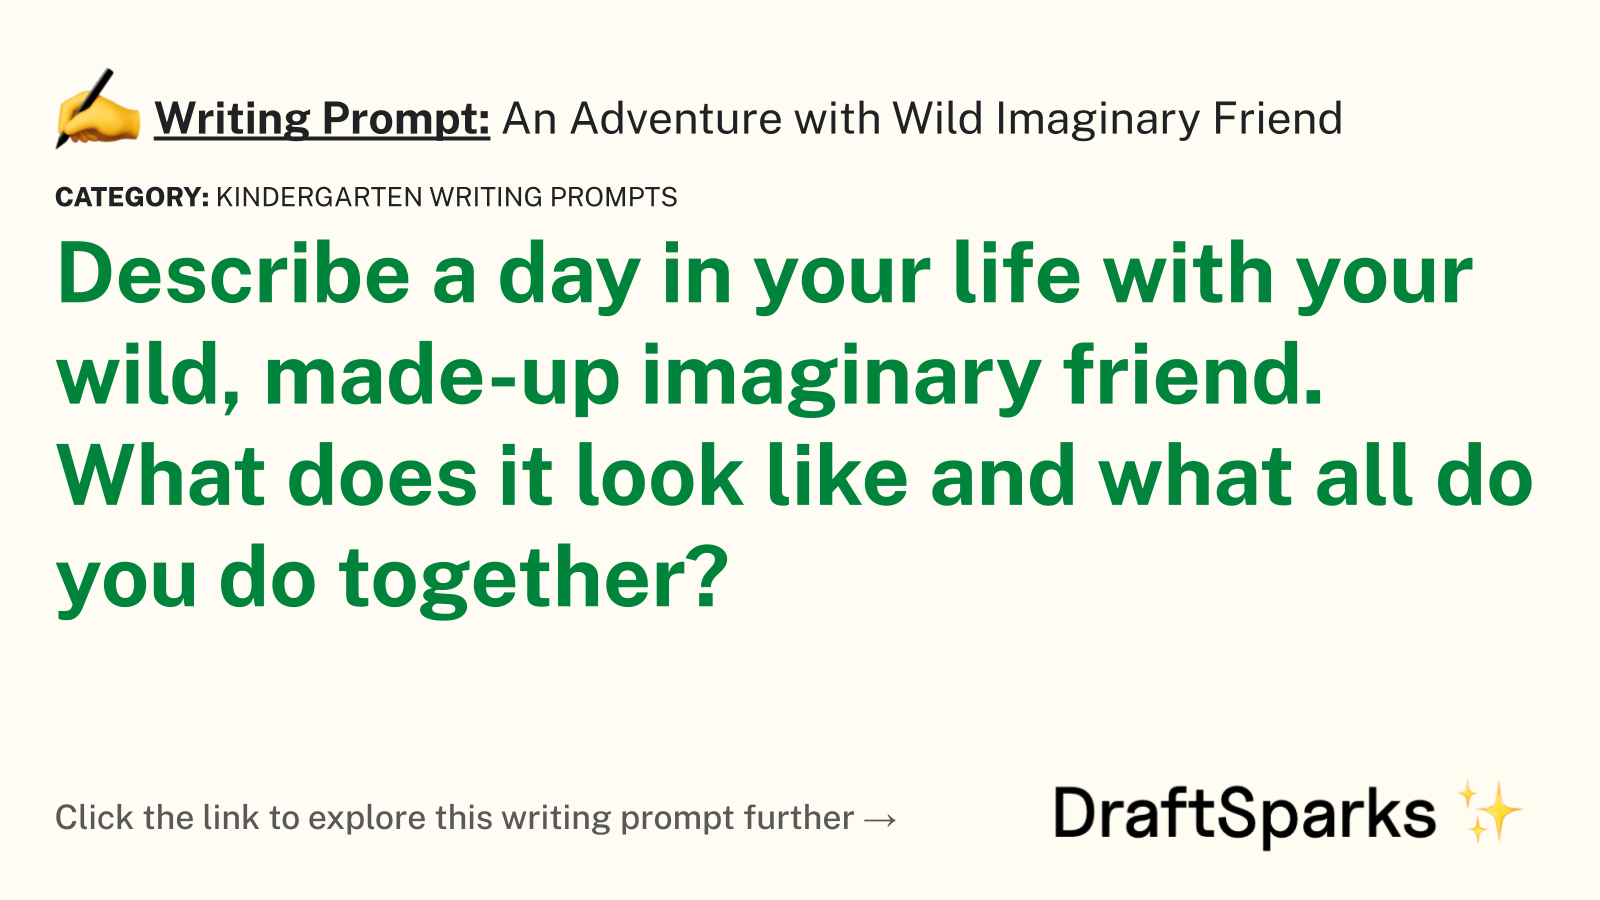 An Adventure with Wild Imaginary Friend